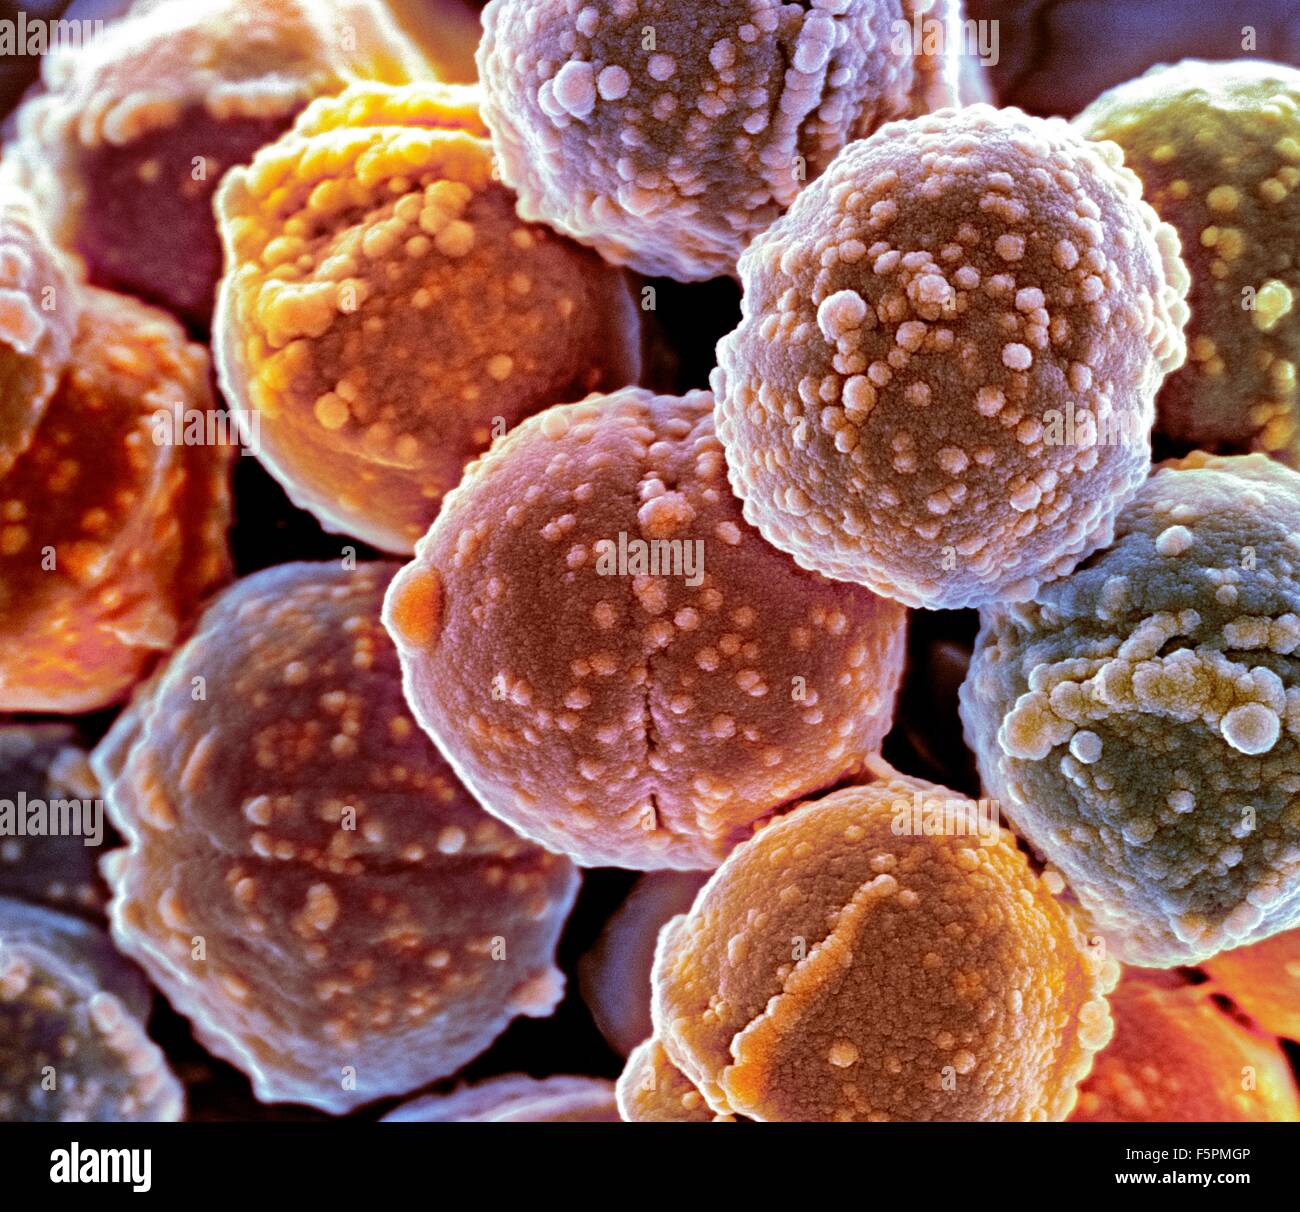 Staphylococcus bacteria, coloured scanning electron micrograph (SEM). Staphylococcus bacteria are an example of cocci (round Stock Photo